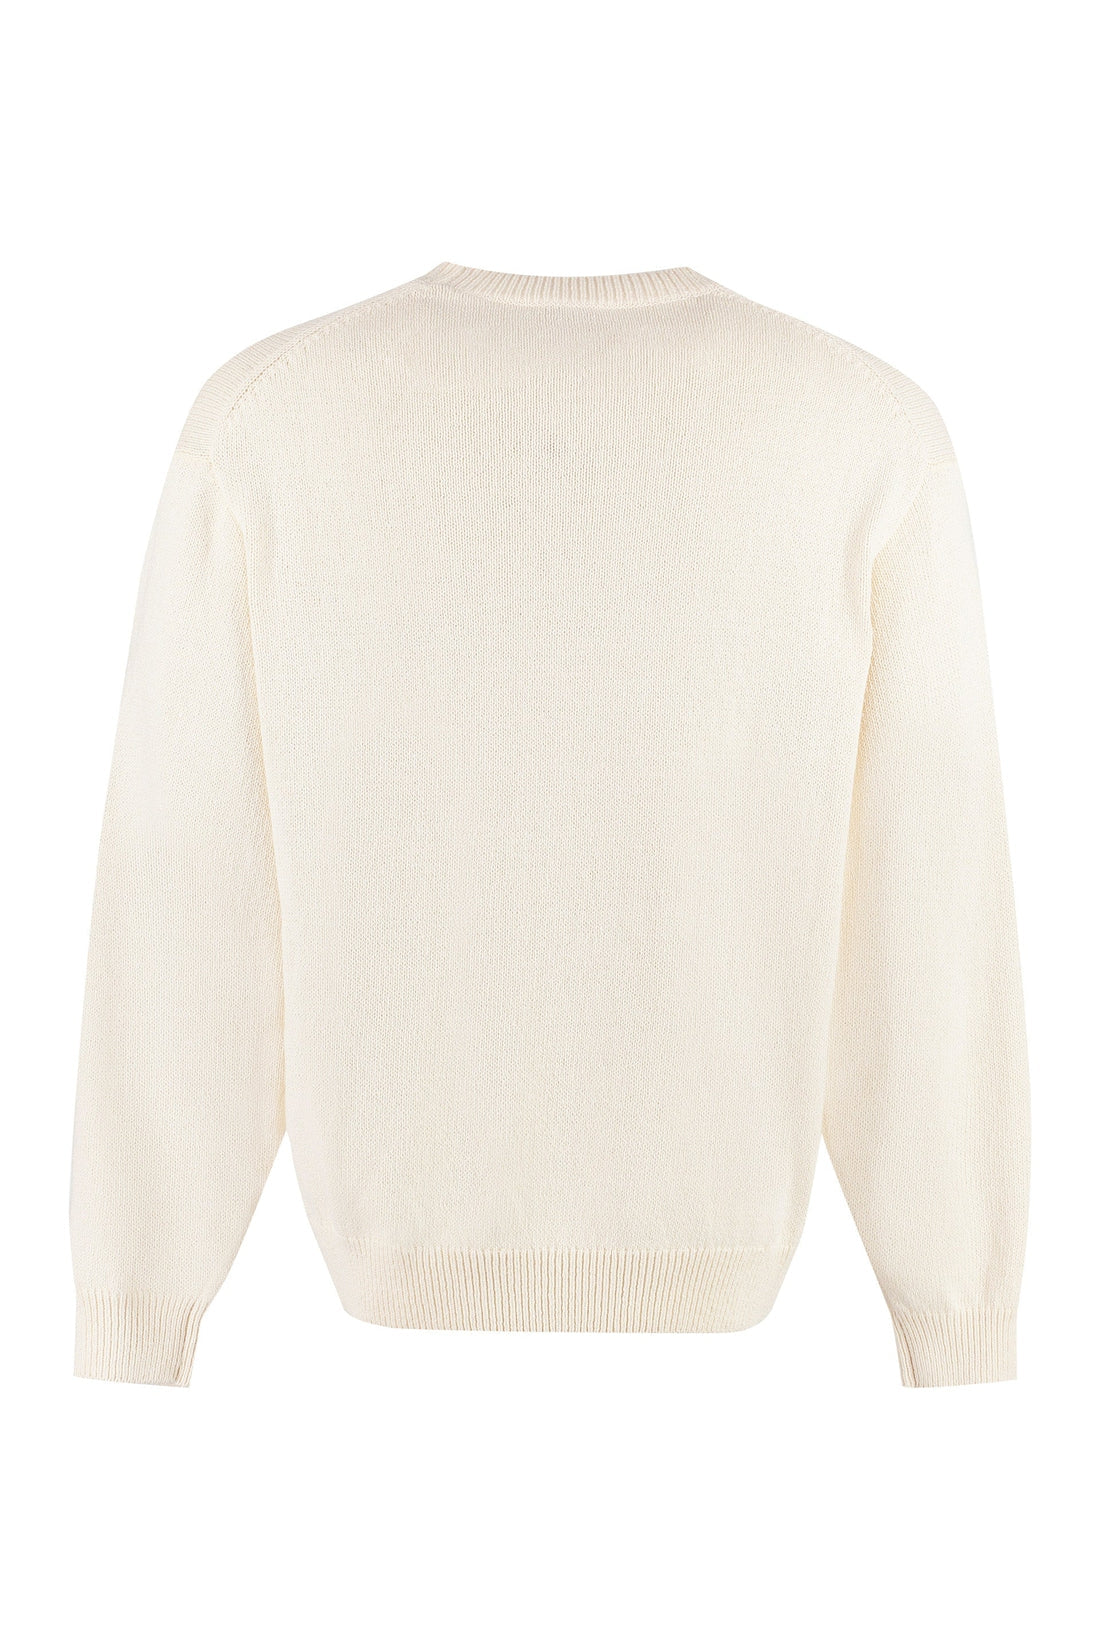 Kenzo-OUTLET-SALE-Long sleeve crew-neck sweater-ARCHIVIST